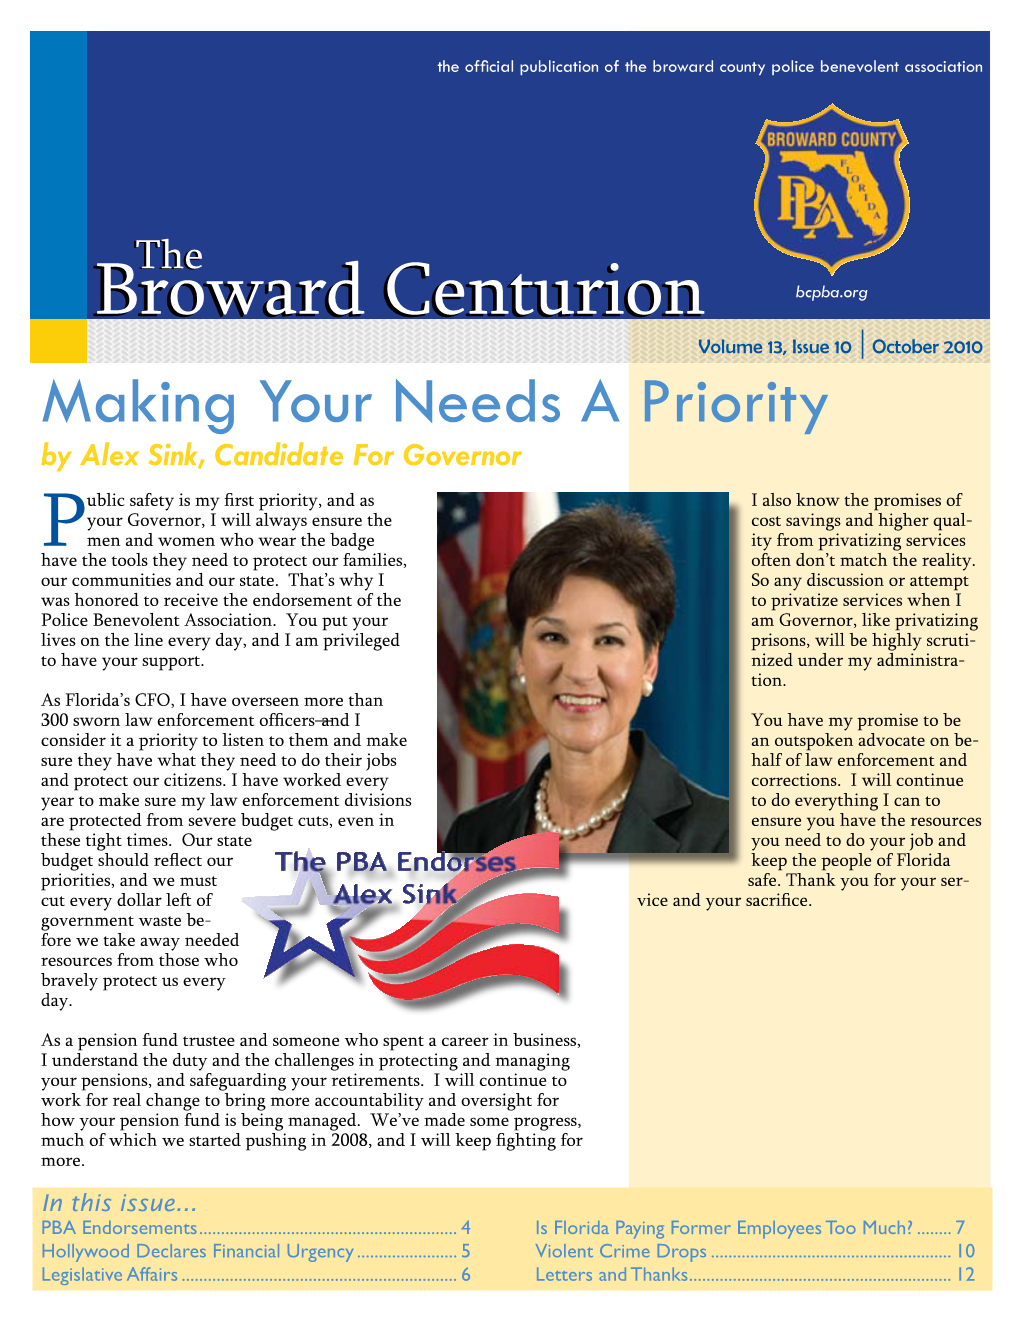 Broward Centurioncenturion Bcpba.Org Volume 13, Issue 10 October 2010 Making Your Needs a Priority by Alex Sink, Candidate for Governor